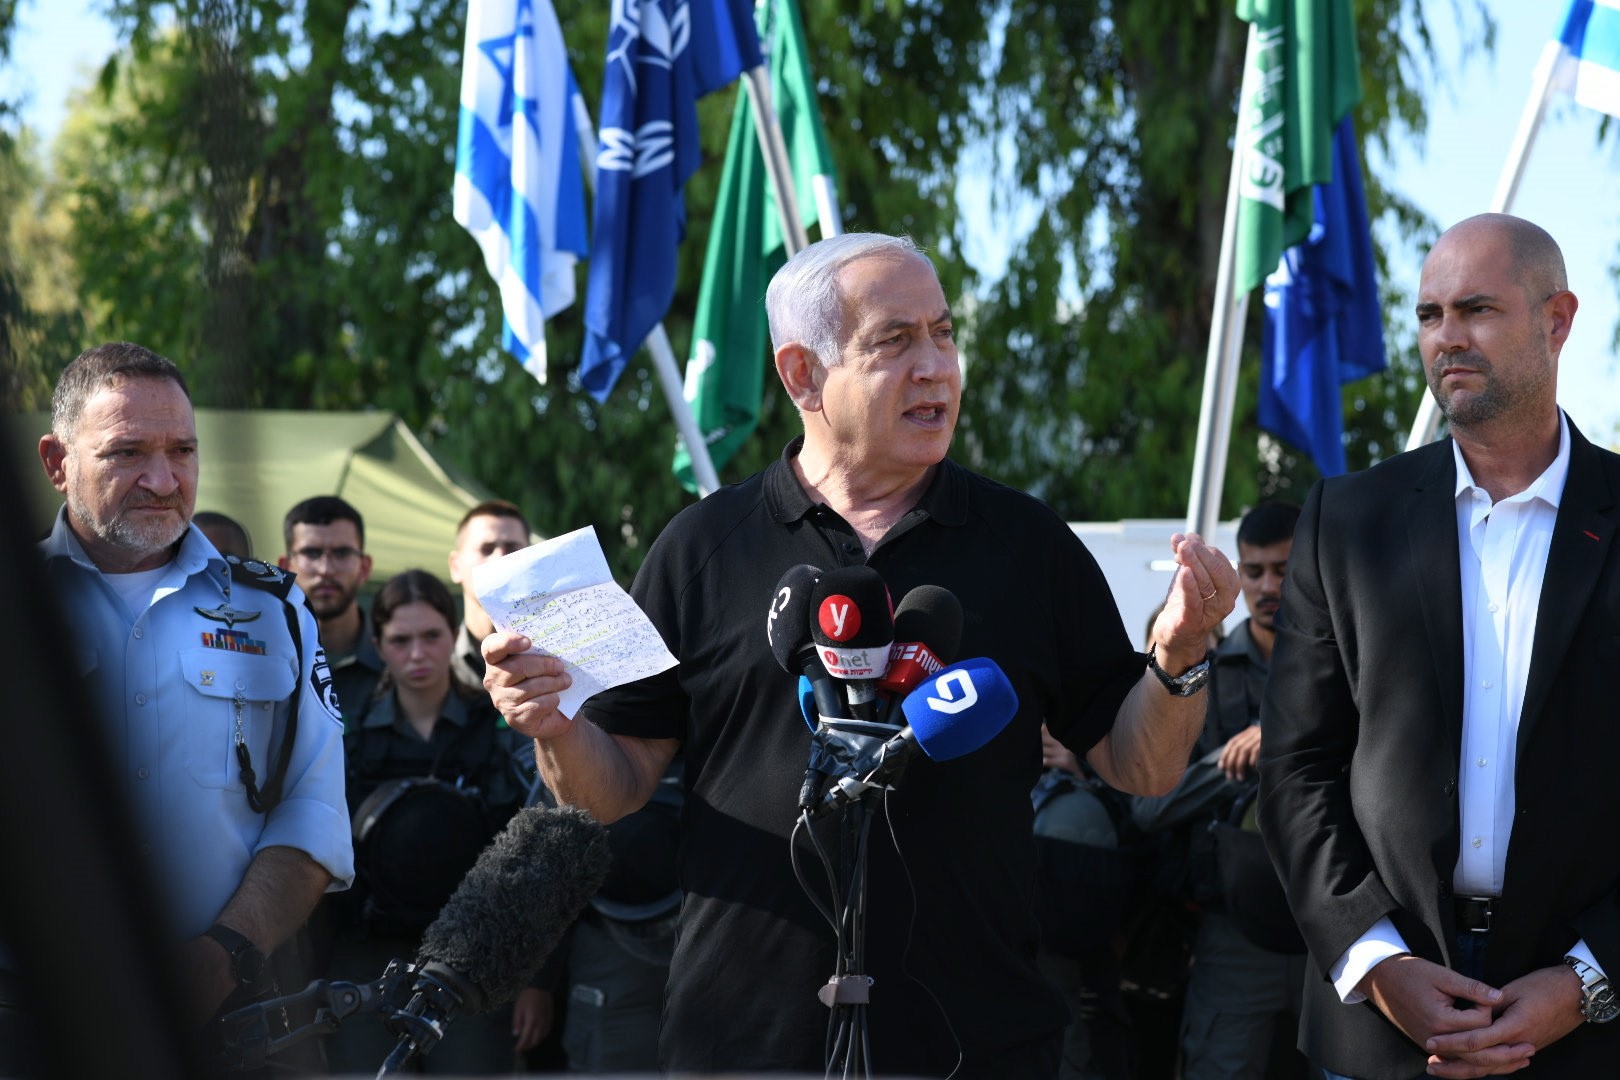 epa09197056 Israeli Prime Minister Benjamin Netanyahu (C) delivers a speech as he meets with Israeli border police, after a wave of violence in the city between Arab and Jewish in the Israeli city of Lod, near Tel Aviv, Israel, 13 May 2021.  EPA/YUVAL CHEN / POOL